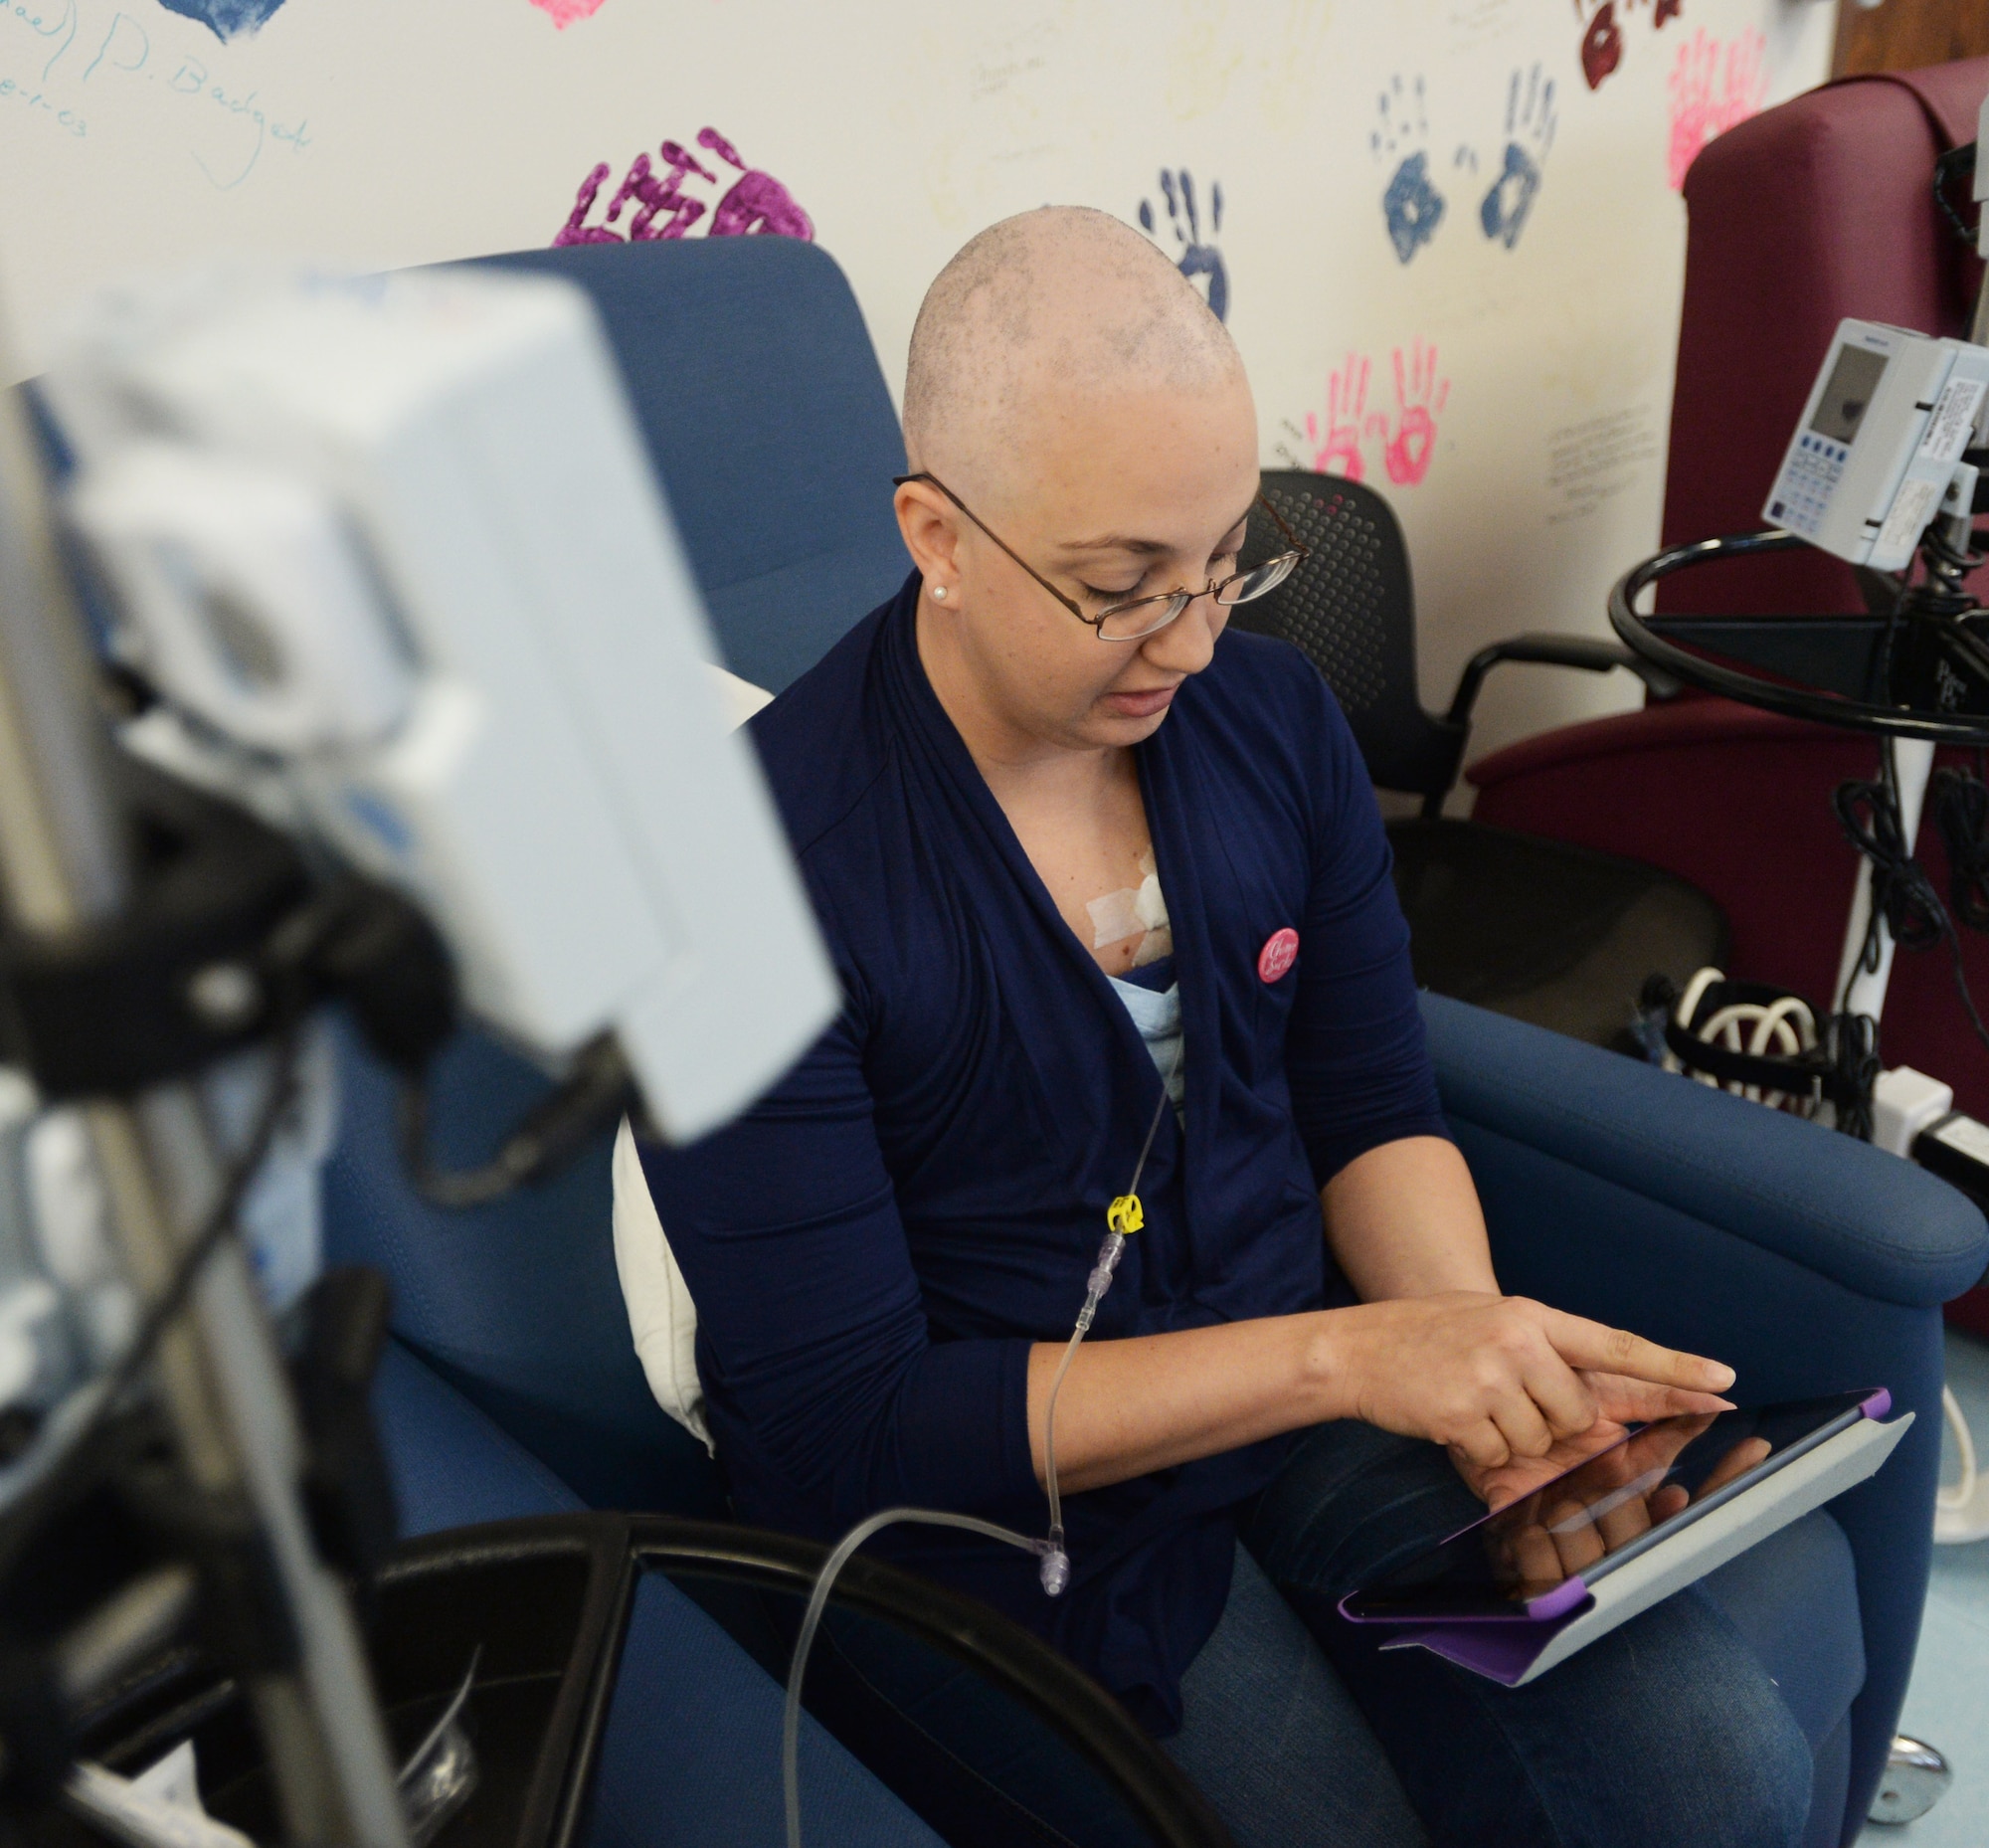 Staff Sgt. Amanda Dick, 15th Medical Support Squadron patient flight, reads an eBook during her chemotherapy treatment at Tripler Army Medical Center, Honolulu, Hawaii, Feb. 26, 2014. Since being diagnosed with breast cancer in October 2013, Dick has finished one-of-two rounds of chemotherapy, and is expected to be done with treatment in April. (U.S. Air Force photo/Staff Sgt. Alexander Martinez)